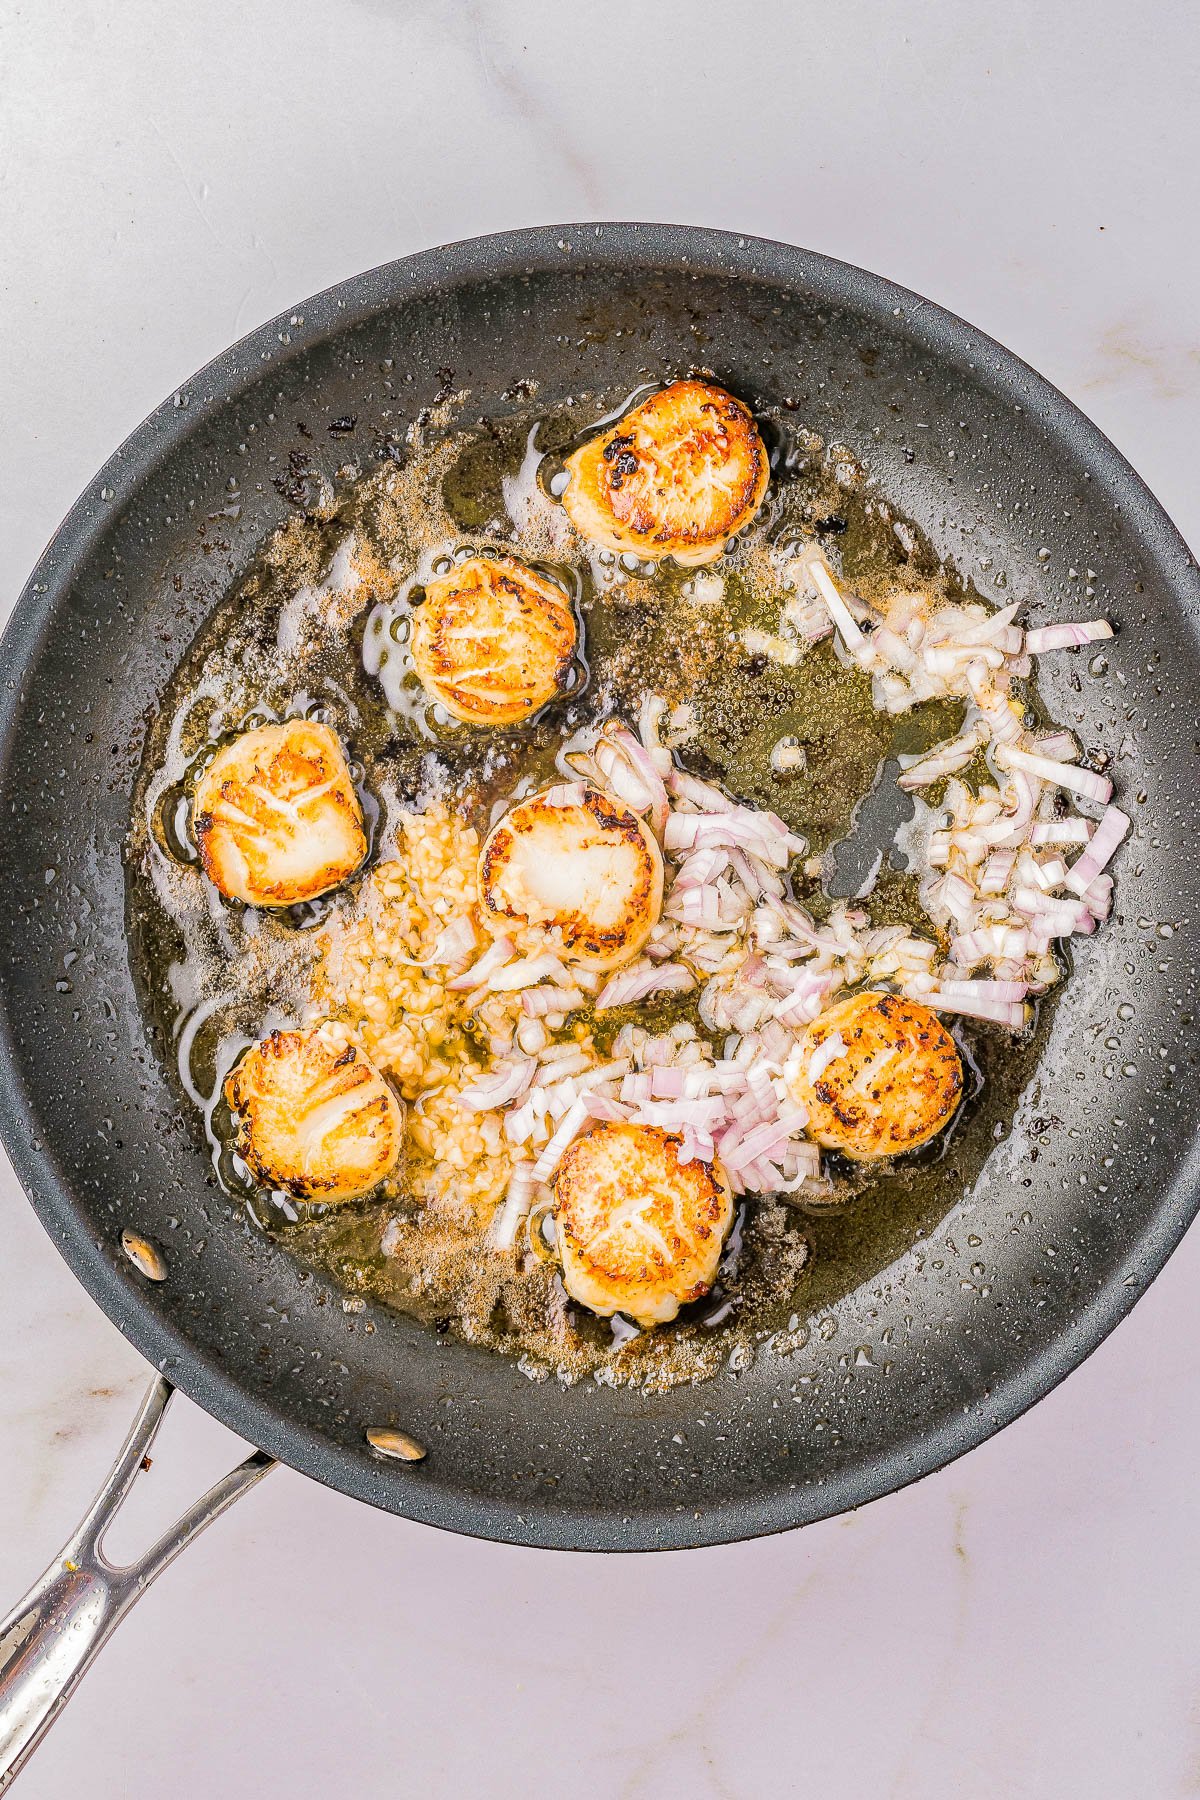 Garlic Butter Scallops - An EASY, one-skillet, 15-minute recipe that tastes restaurant-worthy, yet is incredibly SIMPLE to make at home! Even if you've never made scallops at home before, this is a foolproof recipe for pan-seared, tender, juicy scallops coated in garlic butter with lemon and citrus notes that's sure to IMPRESS! A wonderful choice for a special holiday meal, an anniversary or birthday dinner, or date-night-in! 